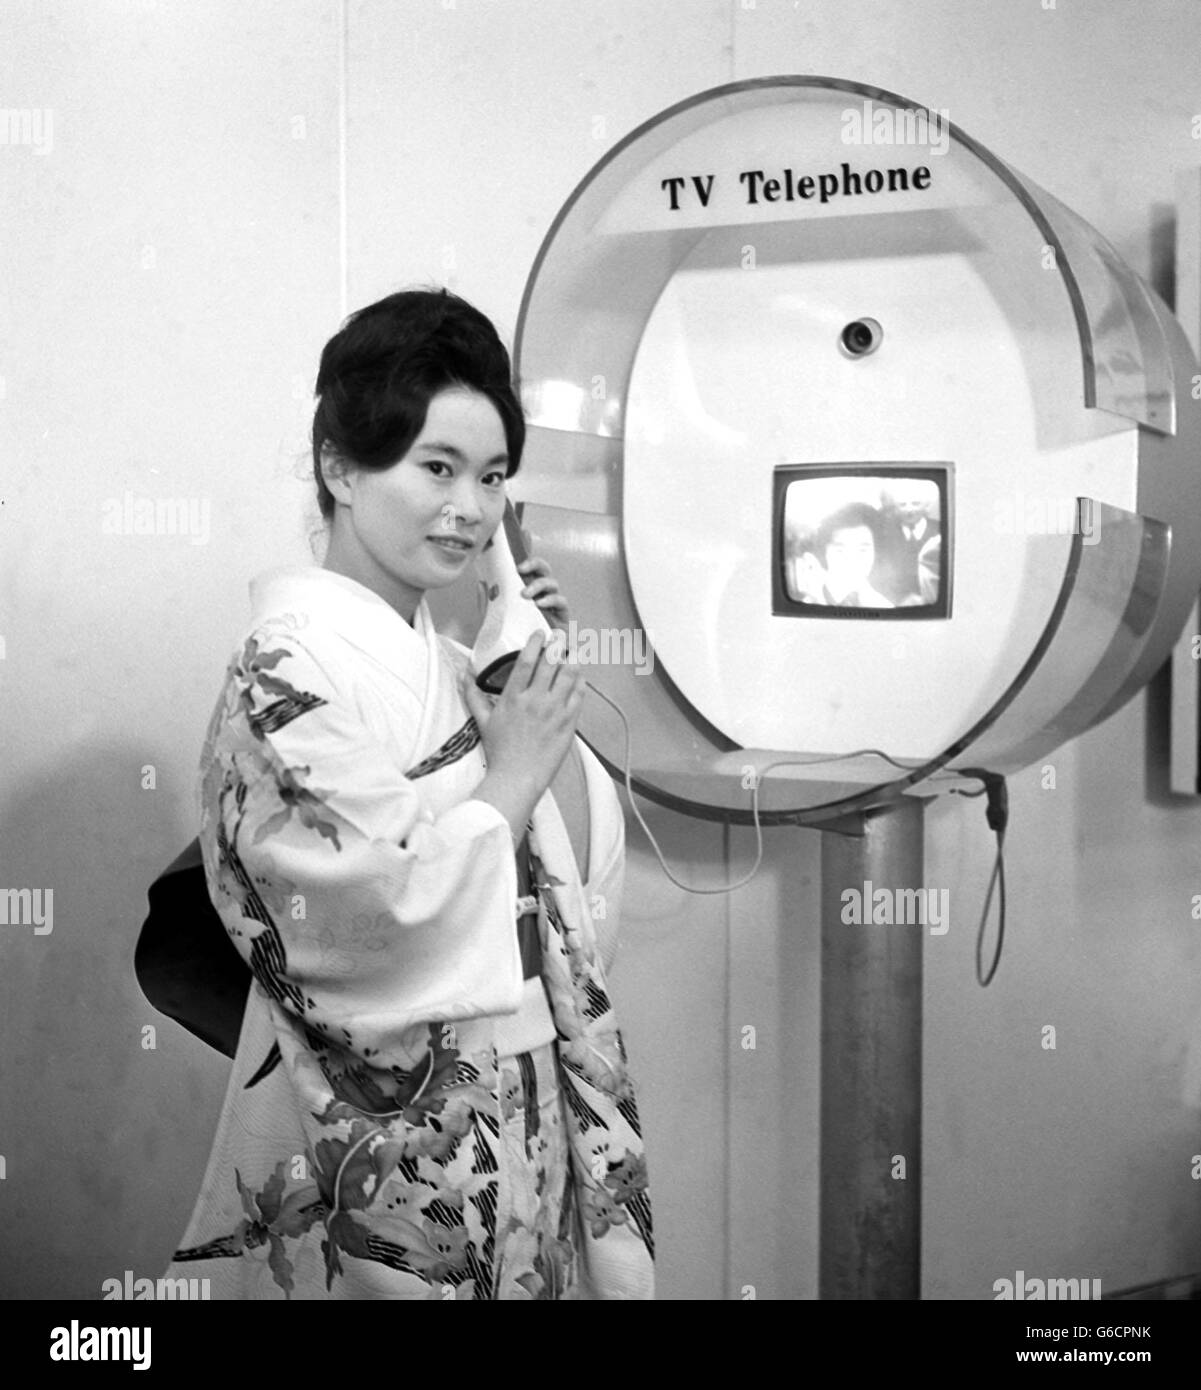 On this day in 1964 a floating Japanese Trade Fair docked at Tilbury docks. Twenty-Two-year-old Fusako Okado, from Kyoto, Japan, demonstrates with a colleague a new television system telephone installed on board the Sakura Maru moored at Tilbury, Essex. Stock Photo